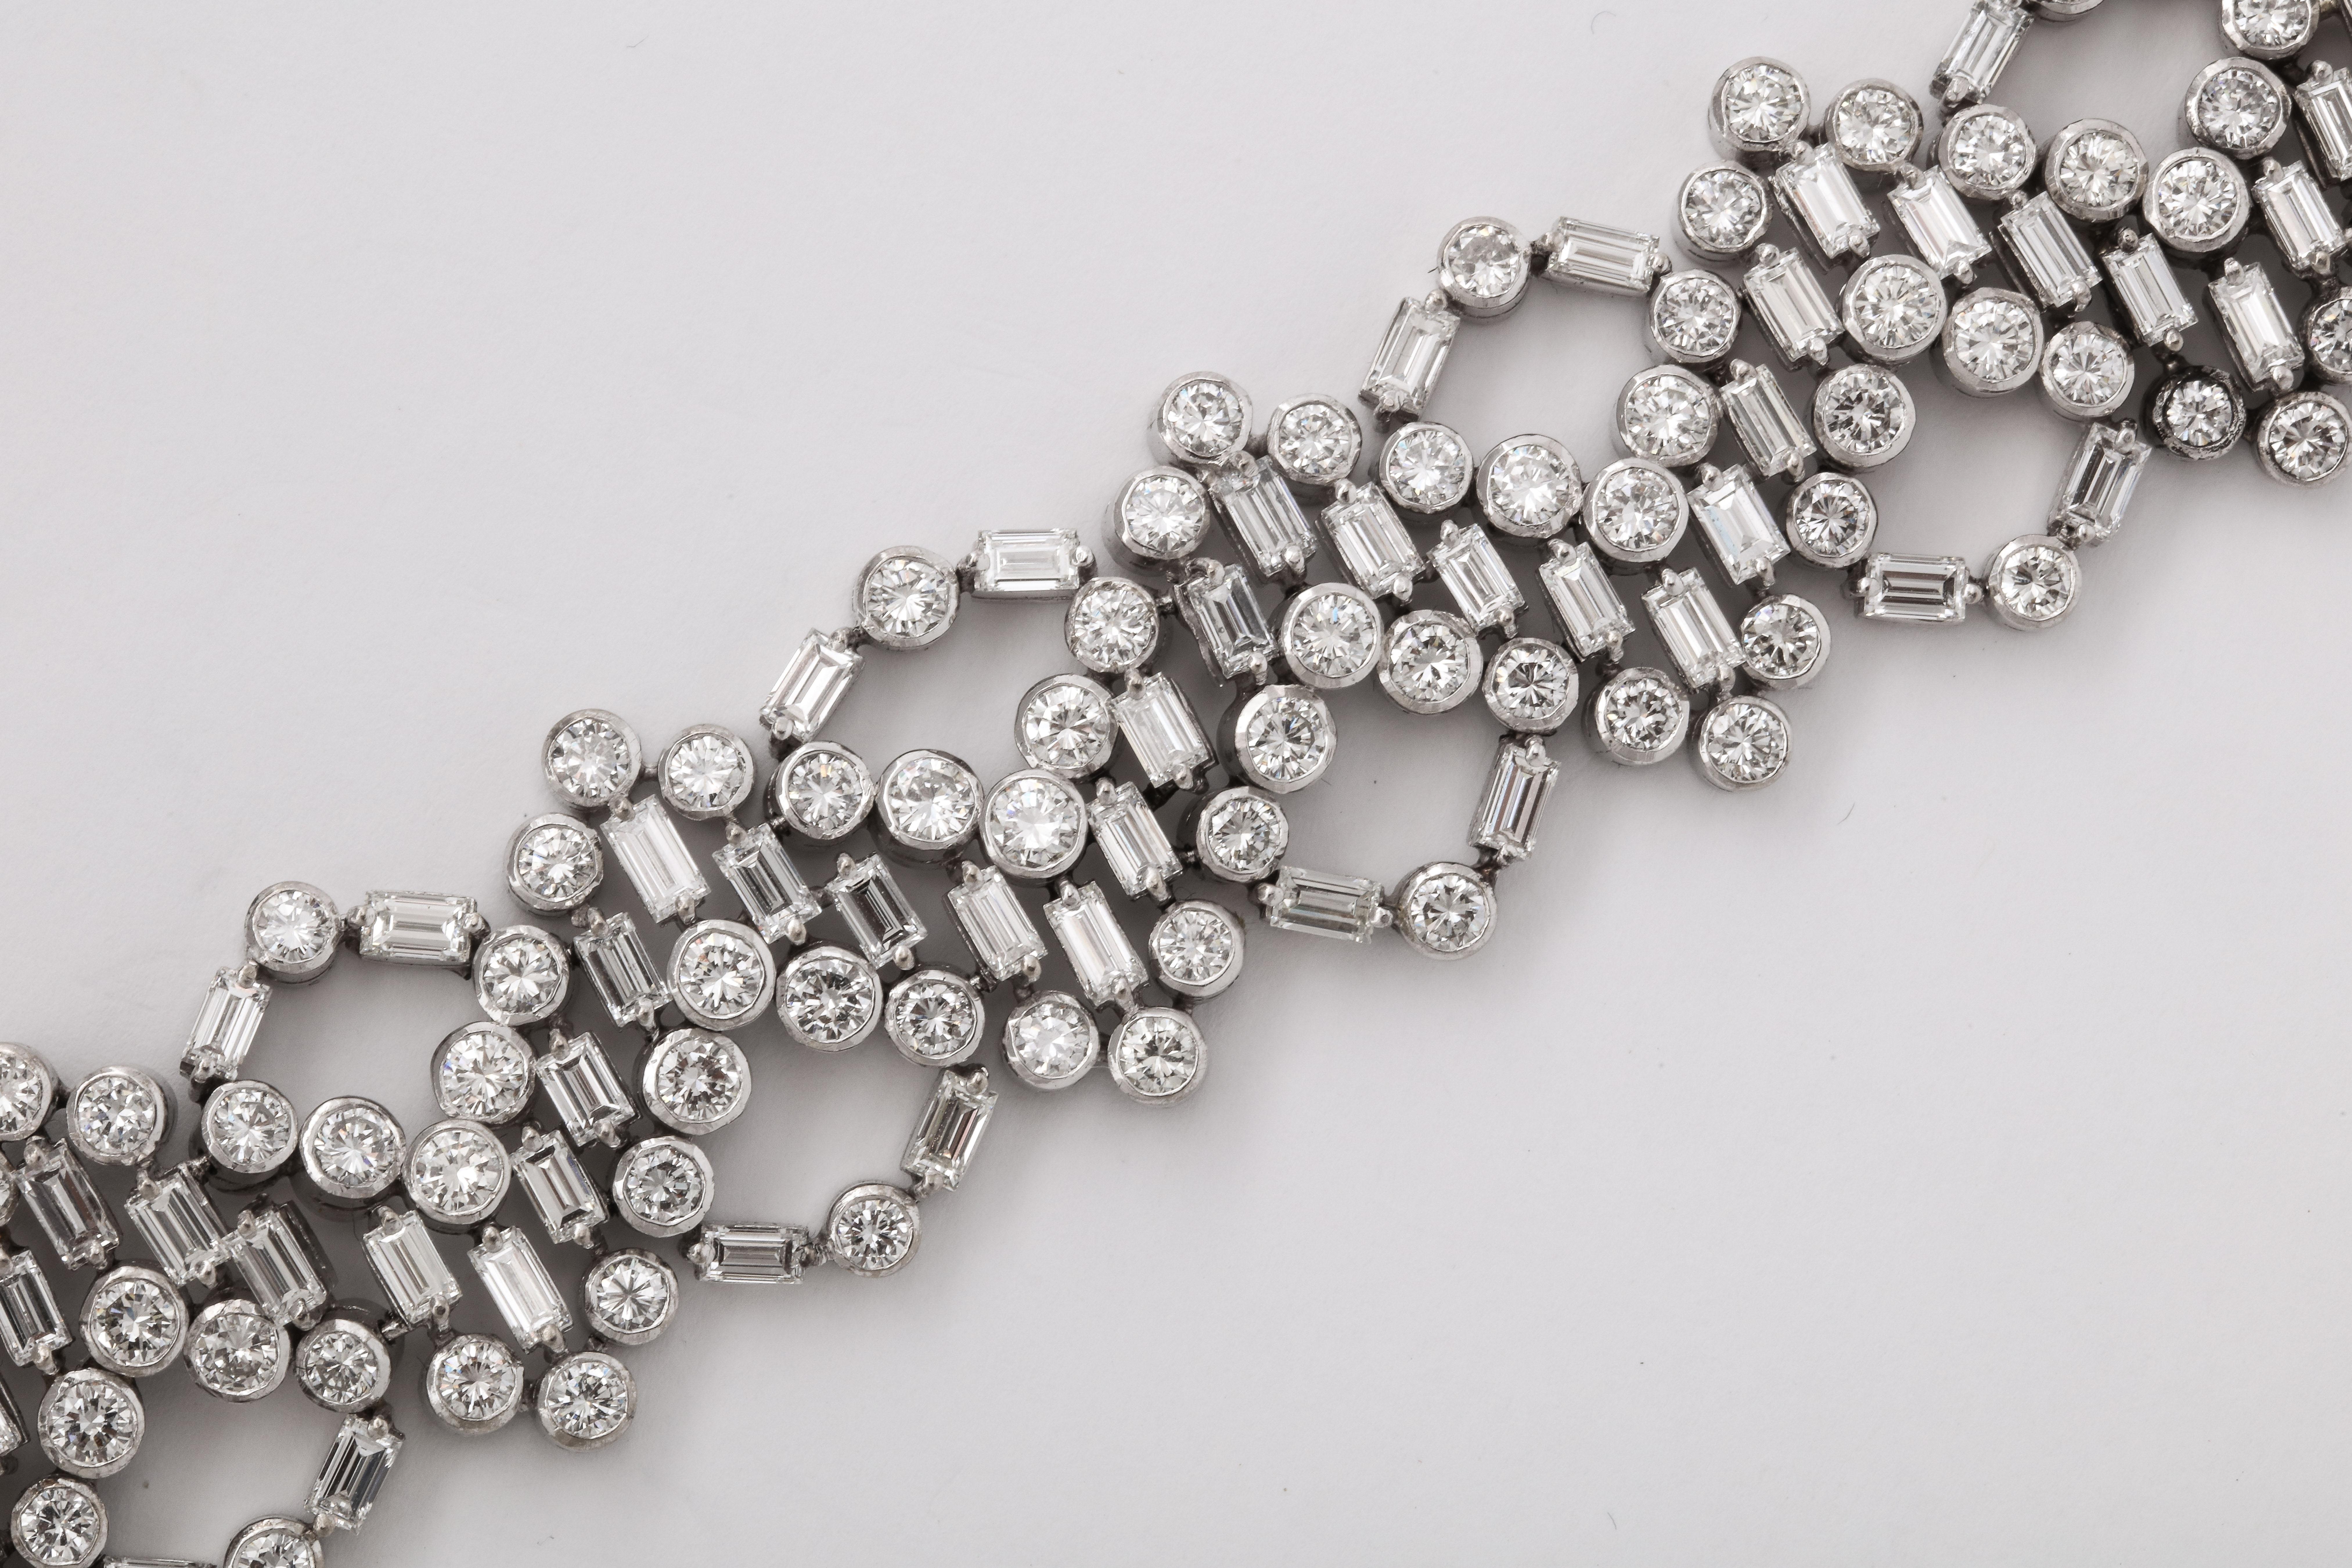 Unusual Midcentury Geometric Diamond Bracelet In Excellent Condition For Sale In New York, NY